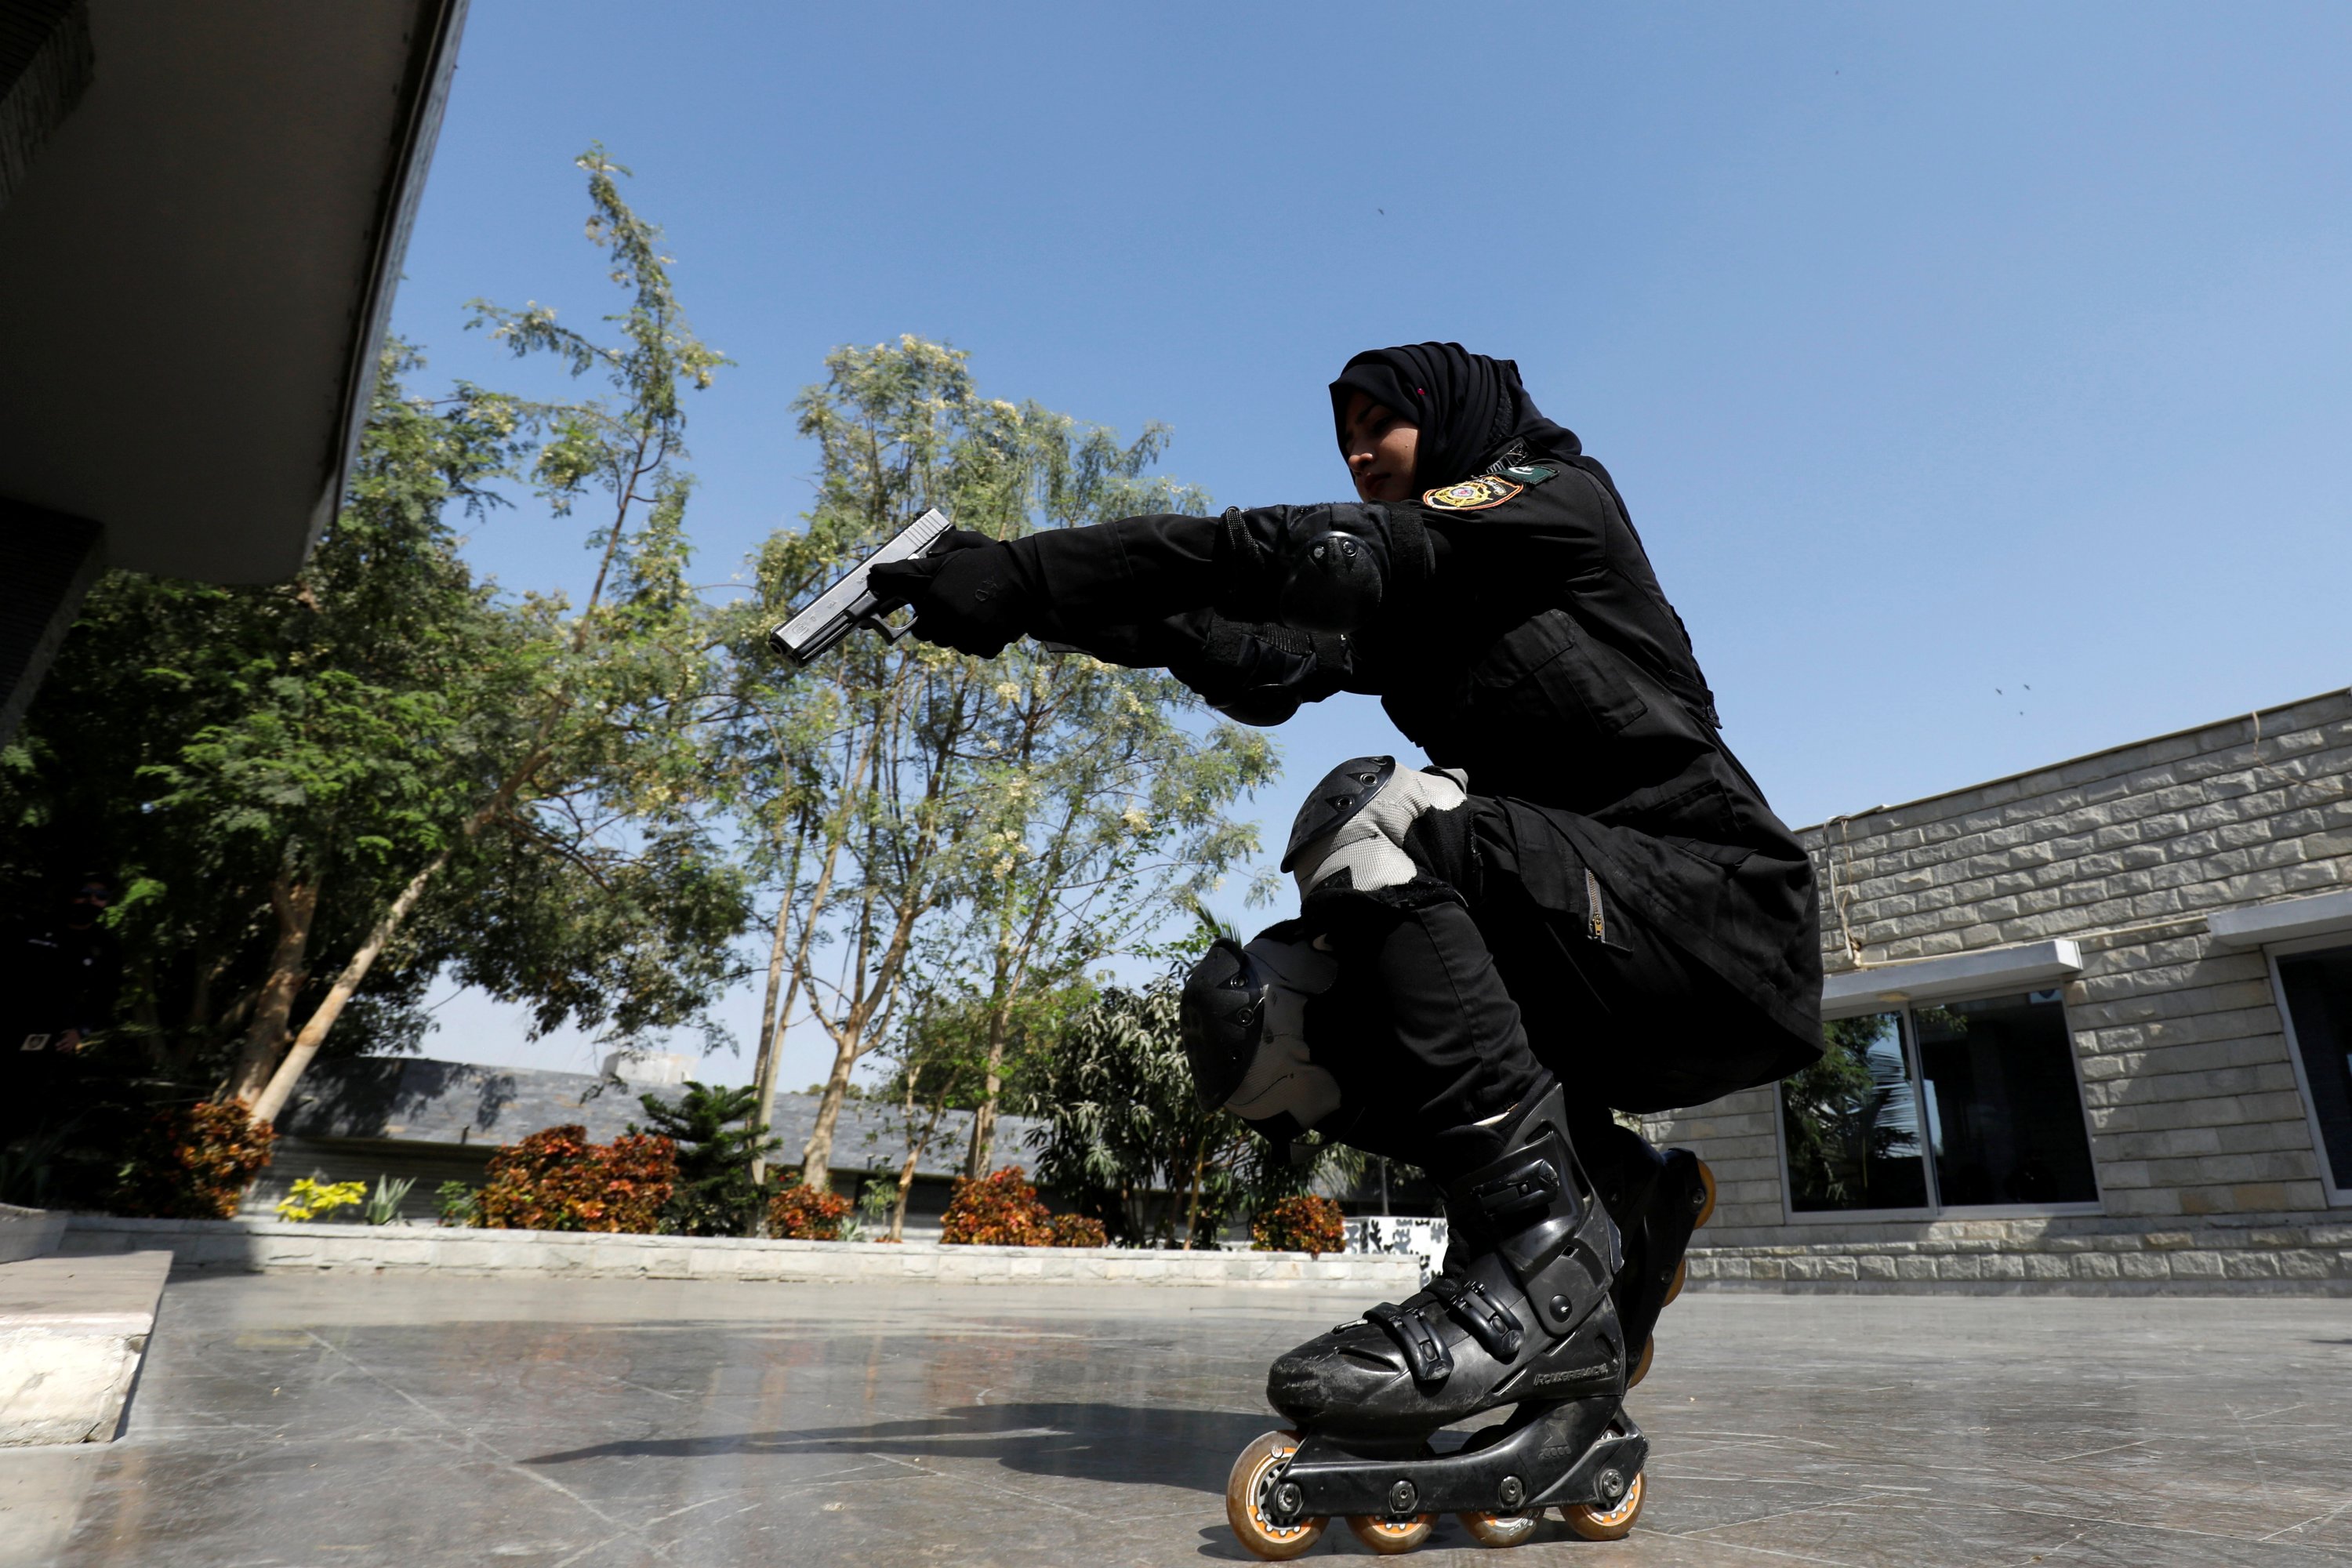 A Special Security Unit (SSU) police member holds up her weapon as she rollerblades during practice at the headquarters in Karachi, Pakistan, Feb. 18, 2021. (Reuters Photo)